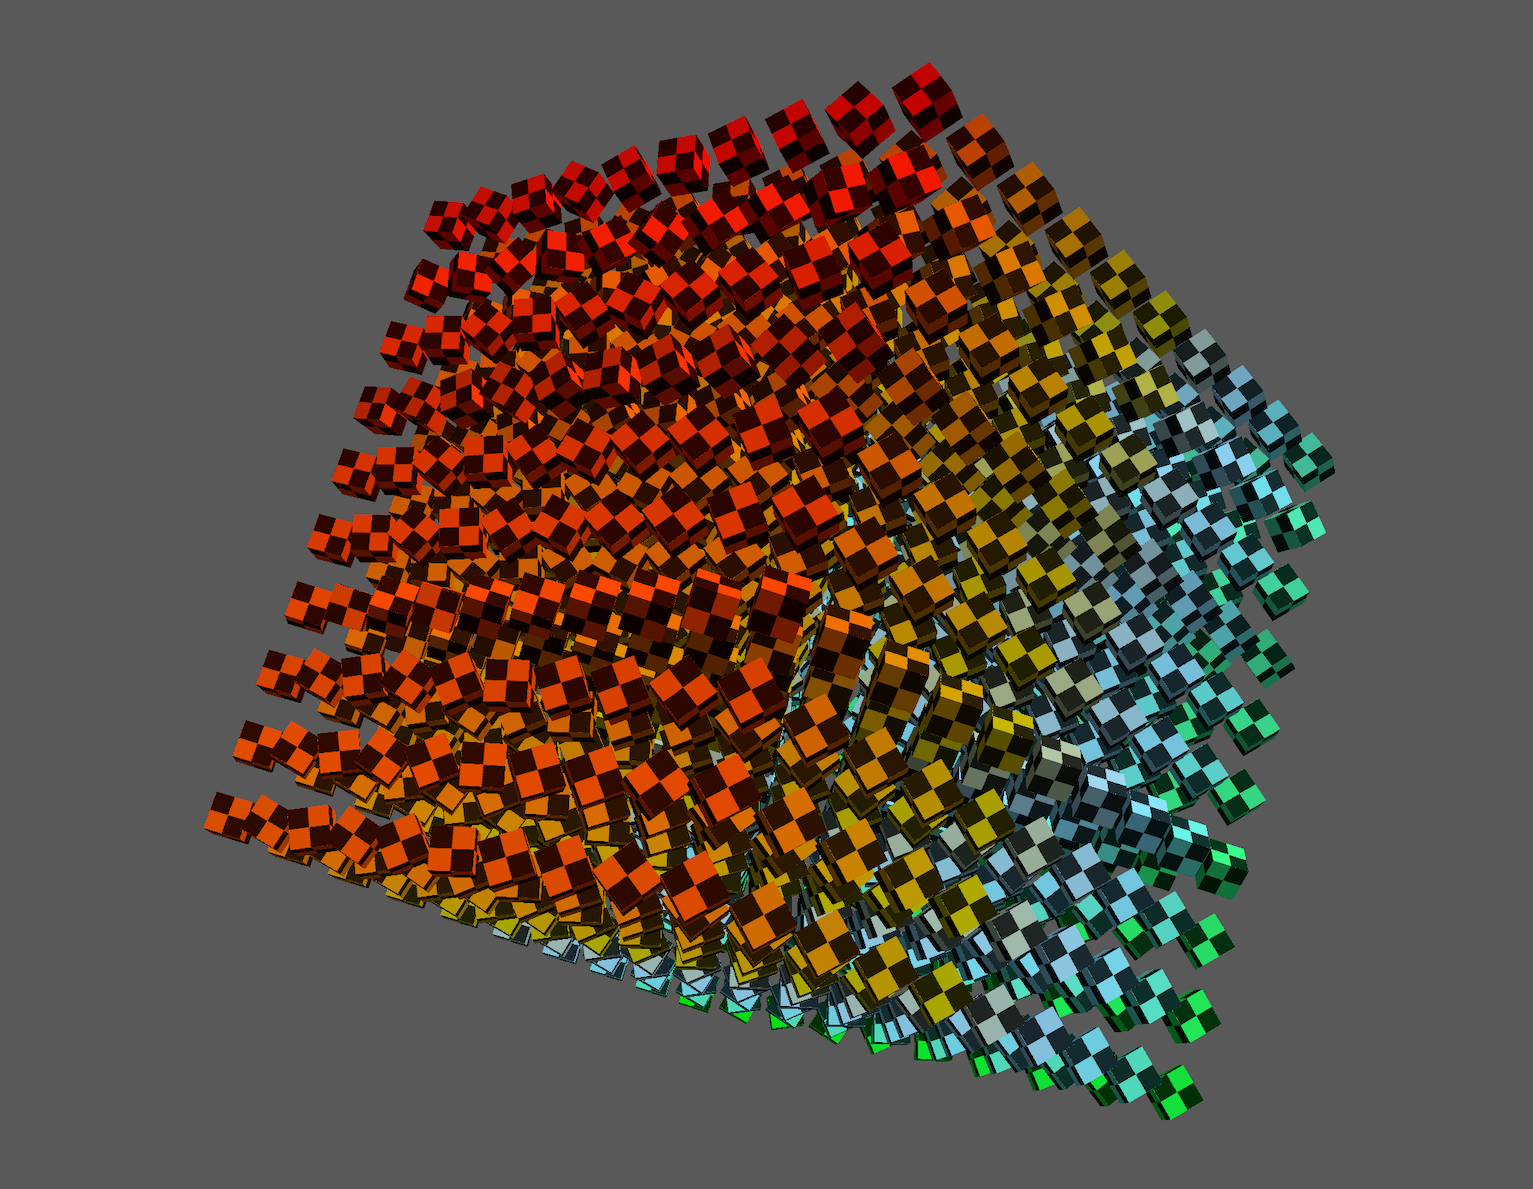 Hundreds of colored cubes, each rotated in differently, are arranged in the shape of a much larger cube